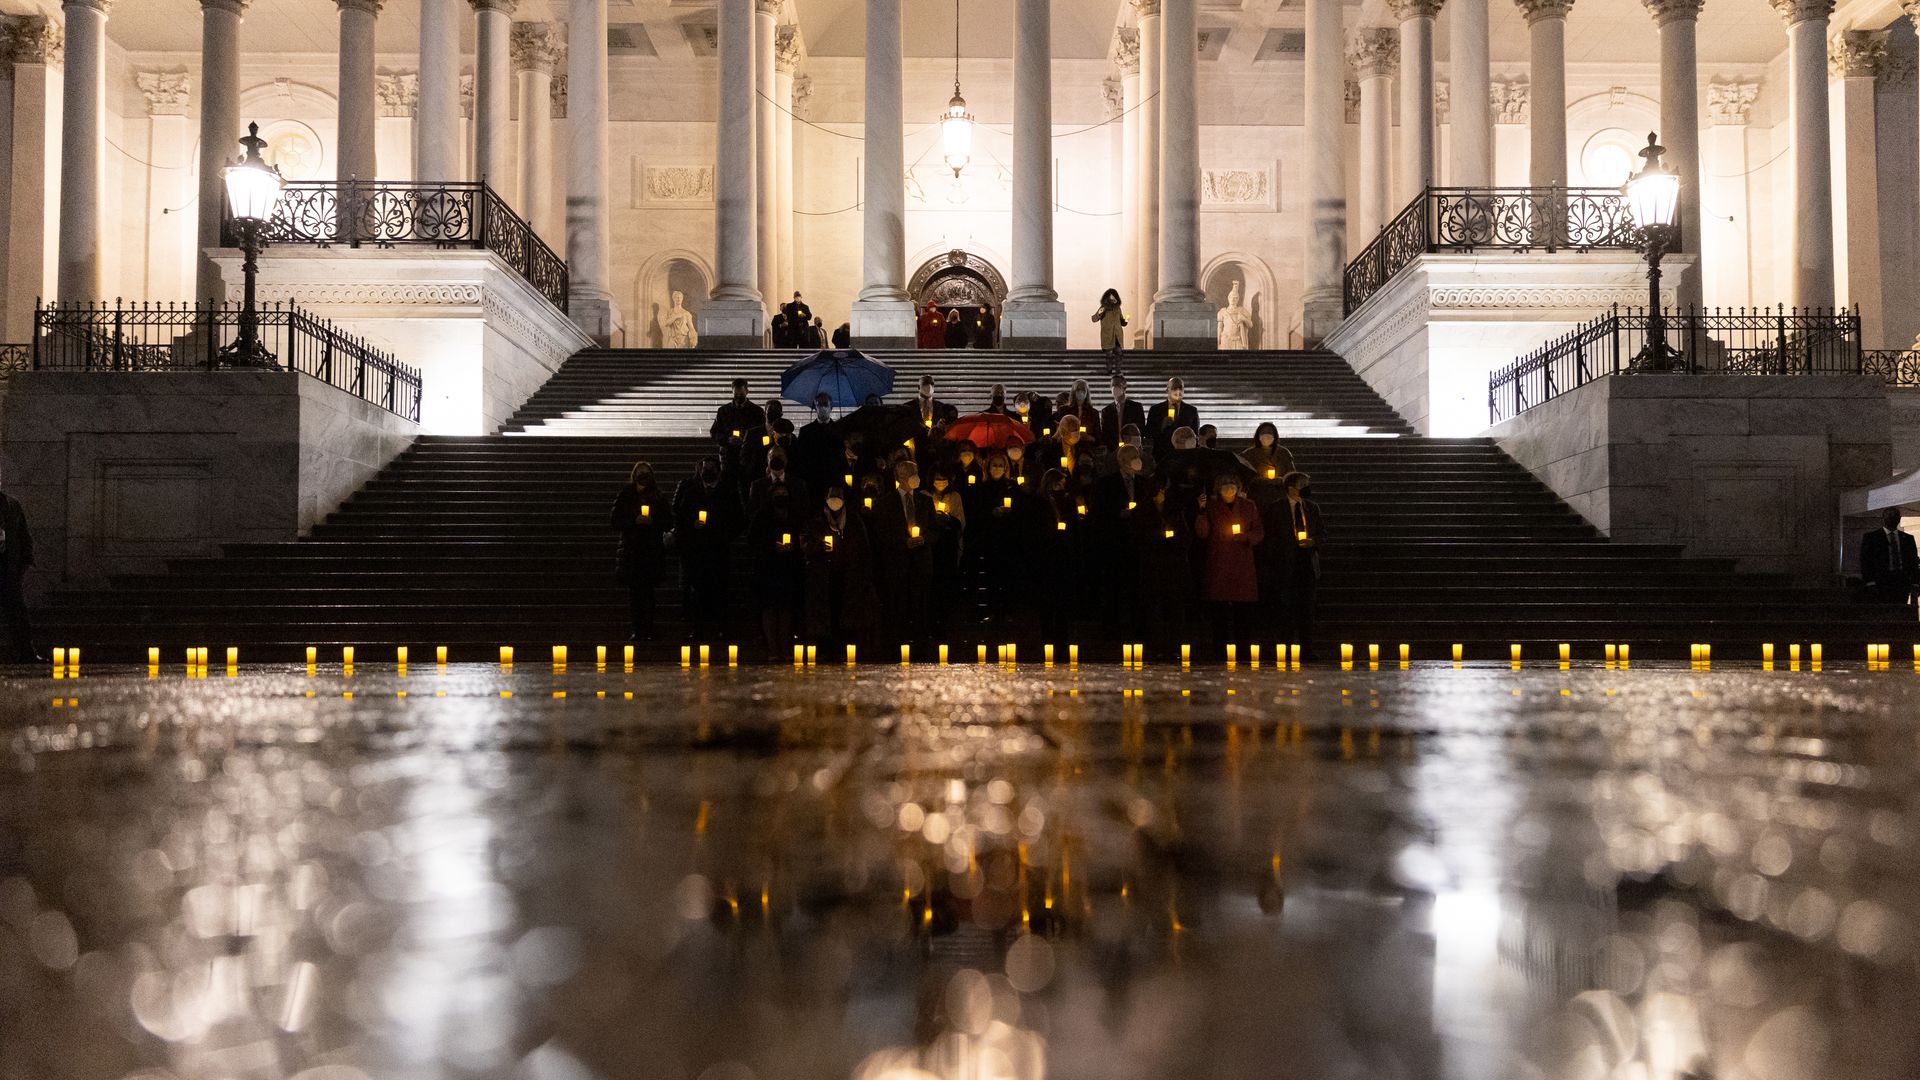 Members of Congress participate in a moment of silence for the 900,000 American lives lost to Covid-19 on the steps of the U.S. Capitol in Washington, D.C., U.S., on Monday, Feb. 7, 2022.